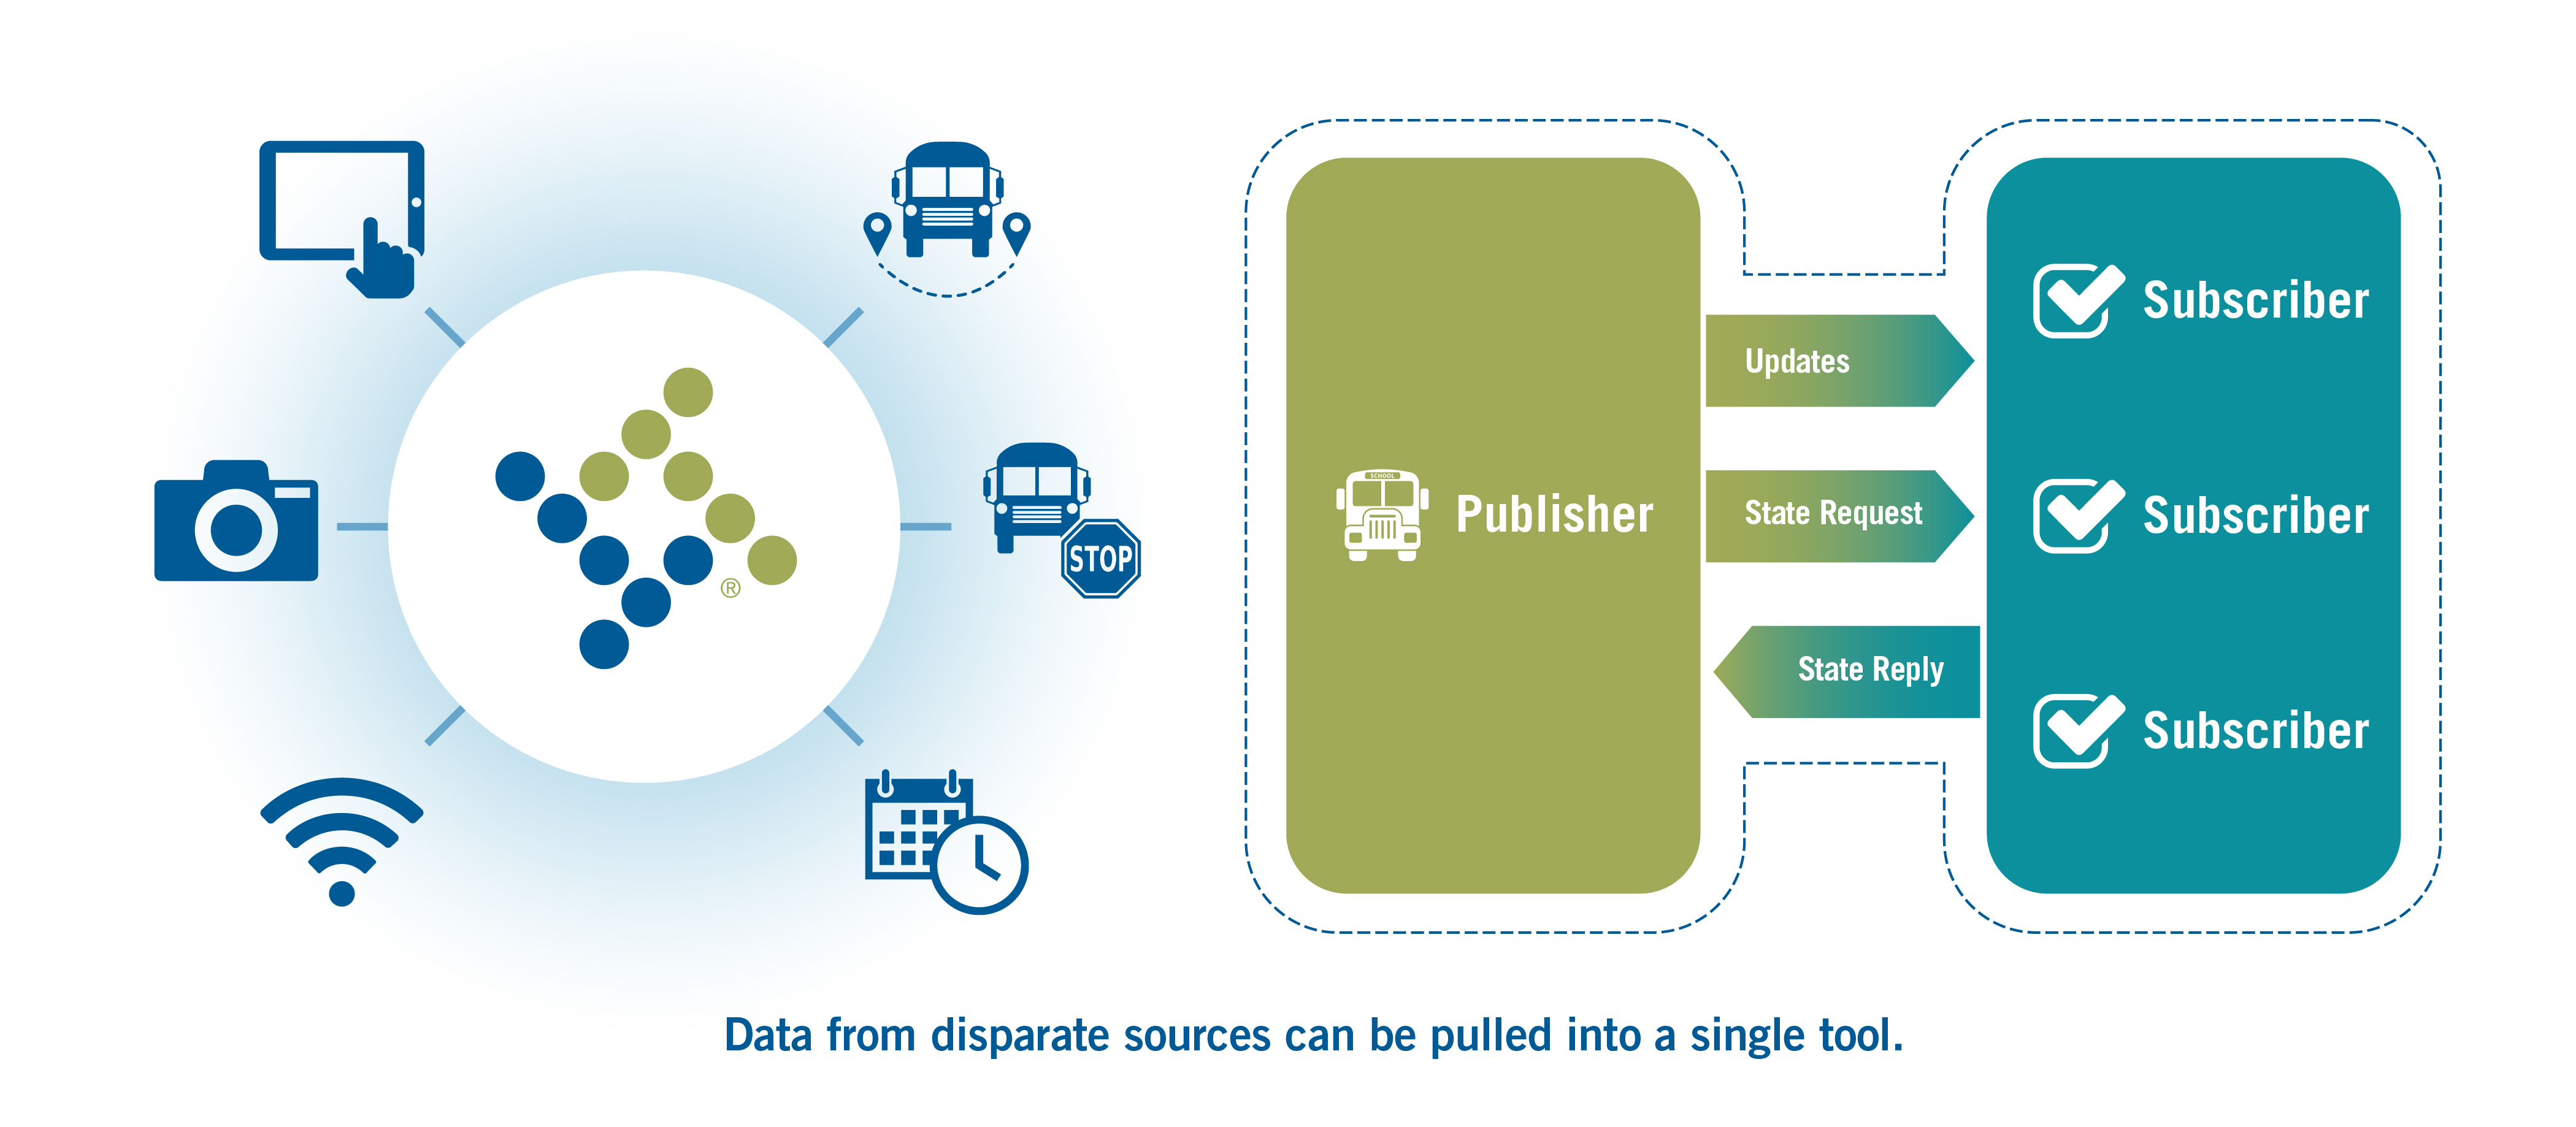 Data from disparate sources can be pulled into a single tool.